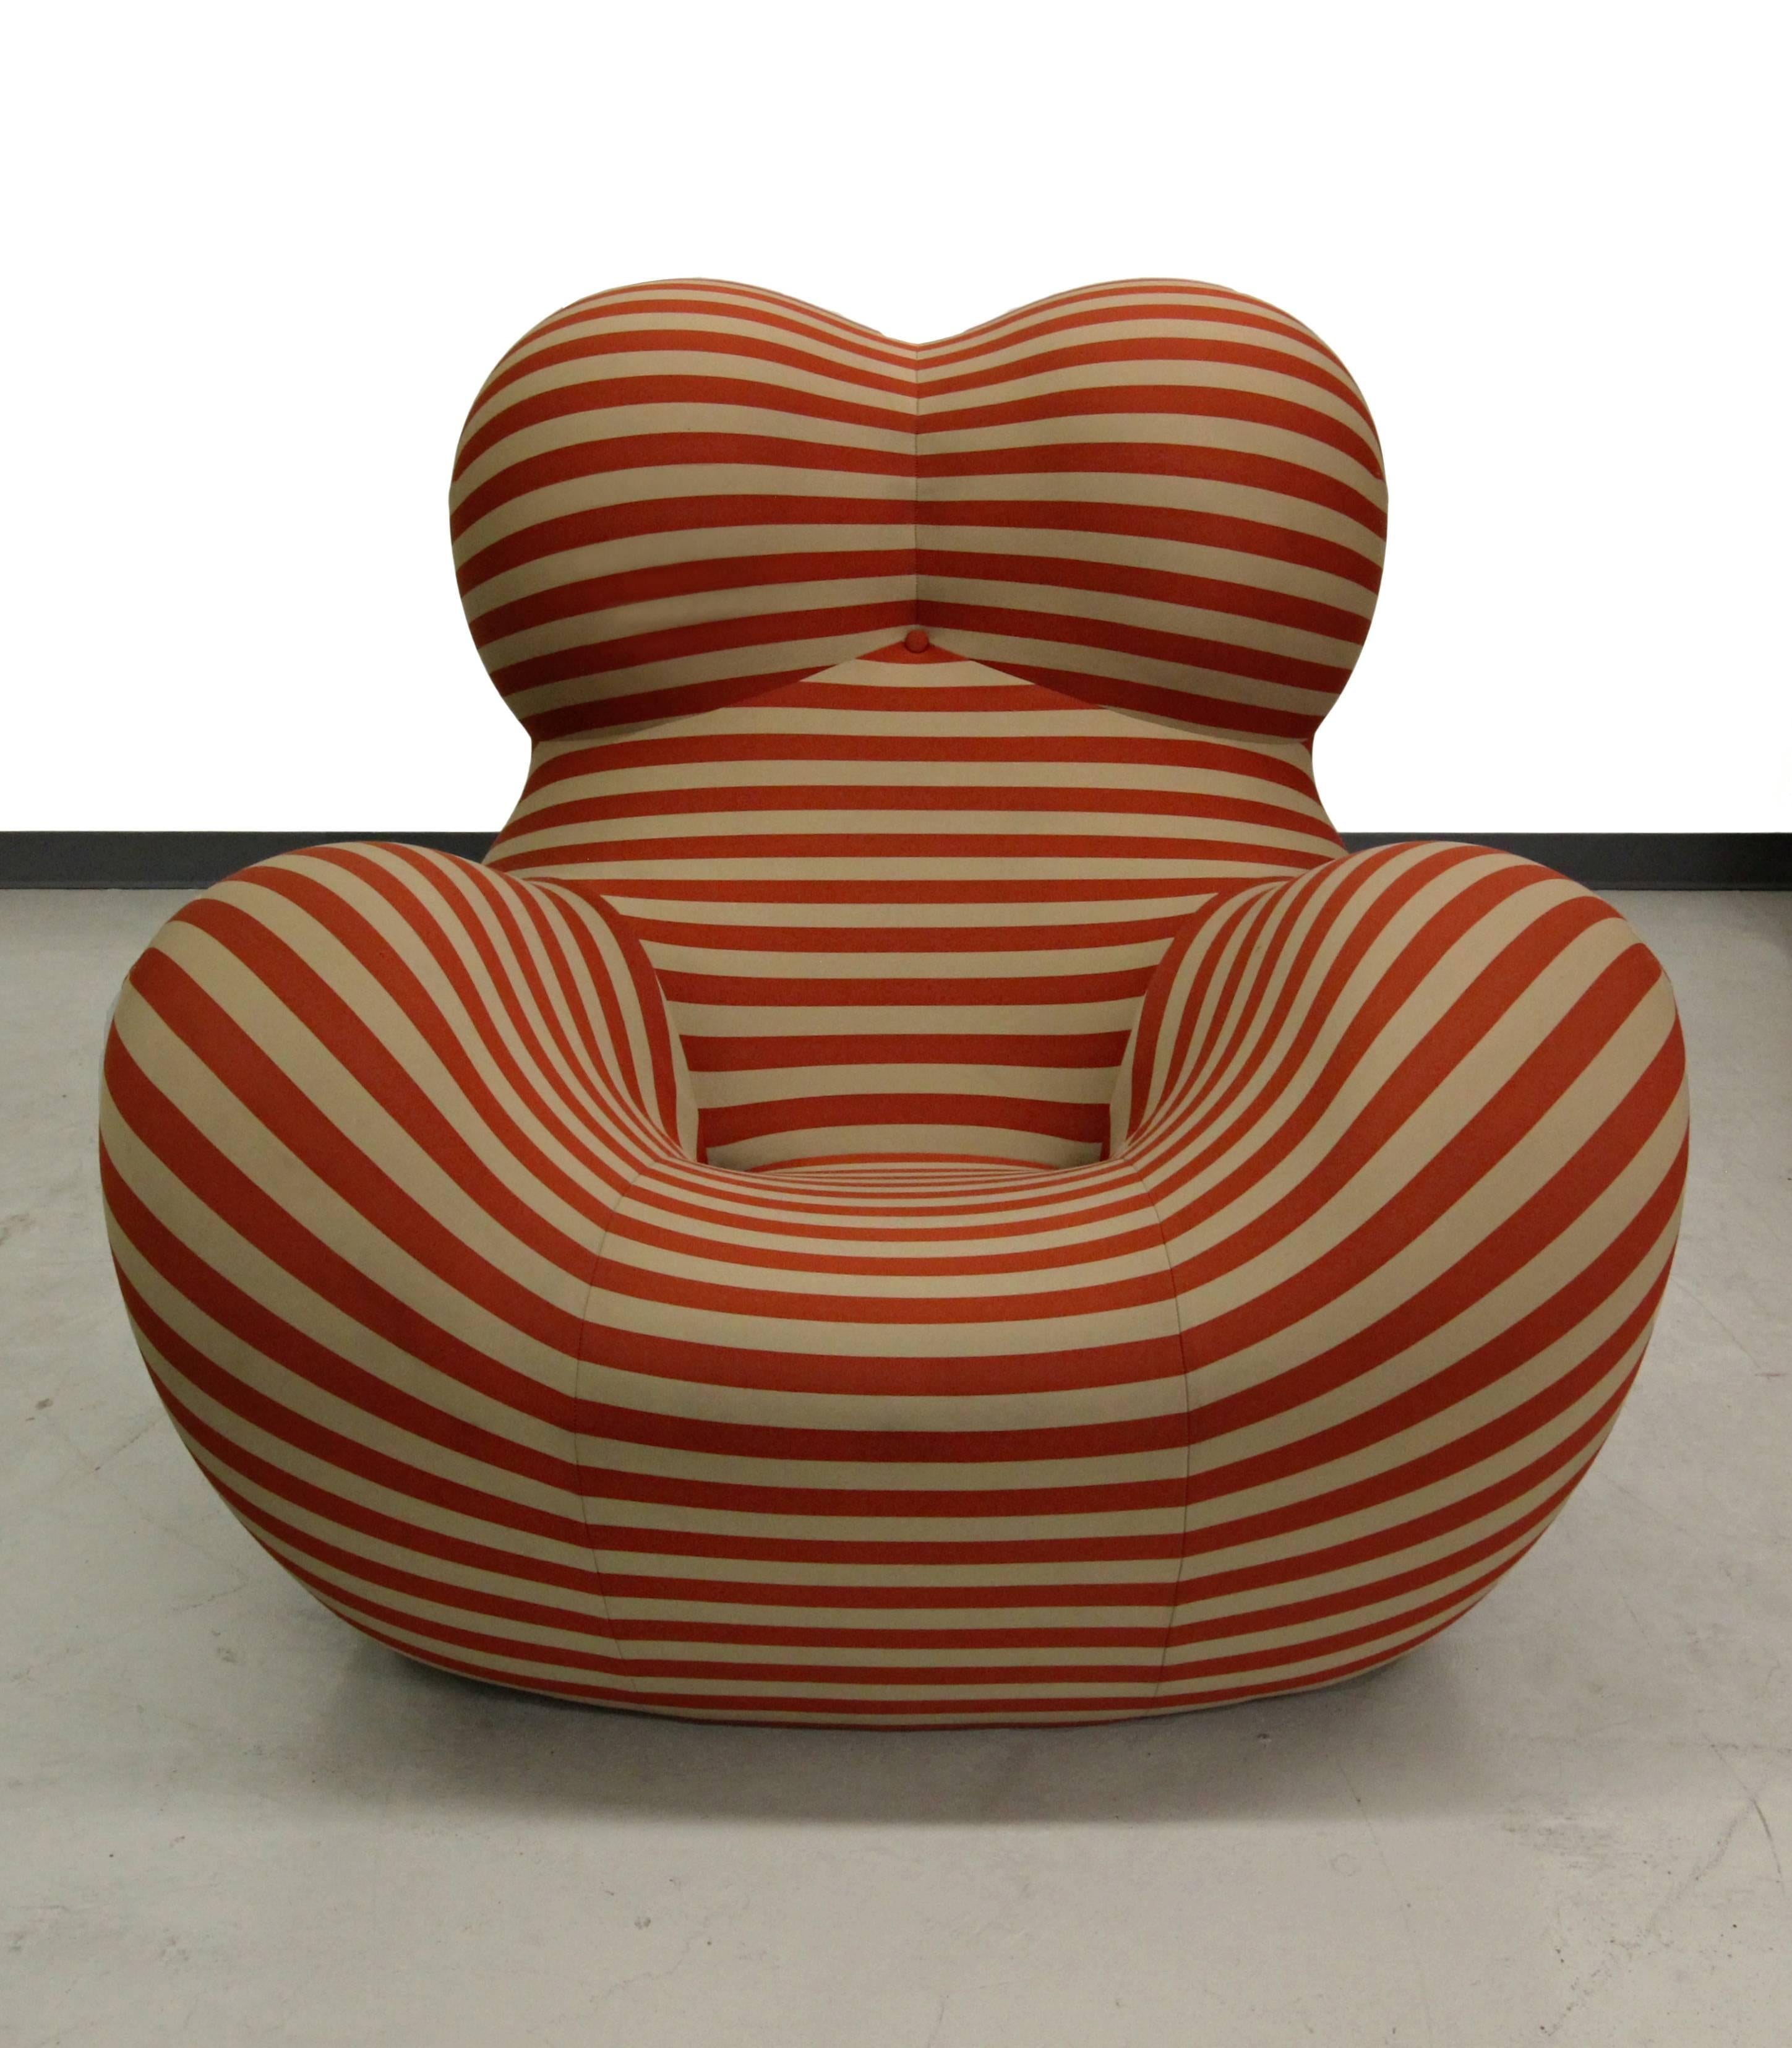 This is an all original up five armchair designed by Gaetano Pesce, also known as Donna, Pesce said “In this design I have expressed my idea of women.